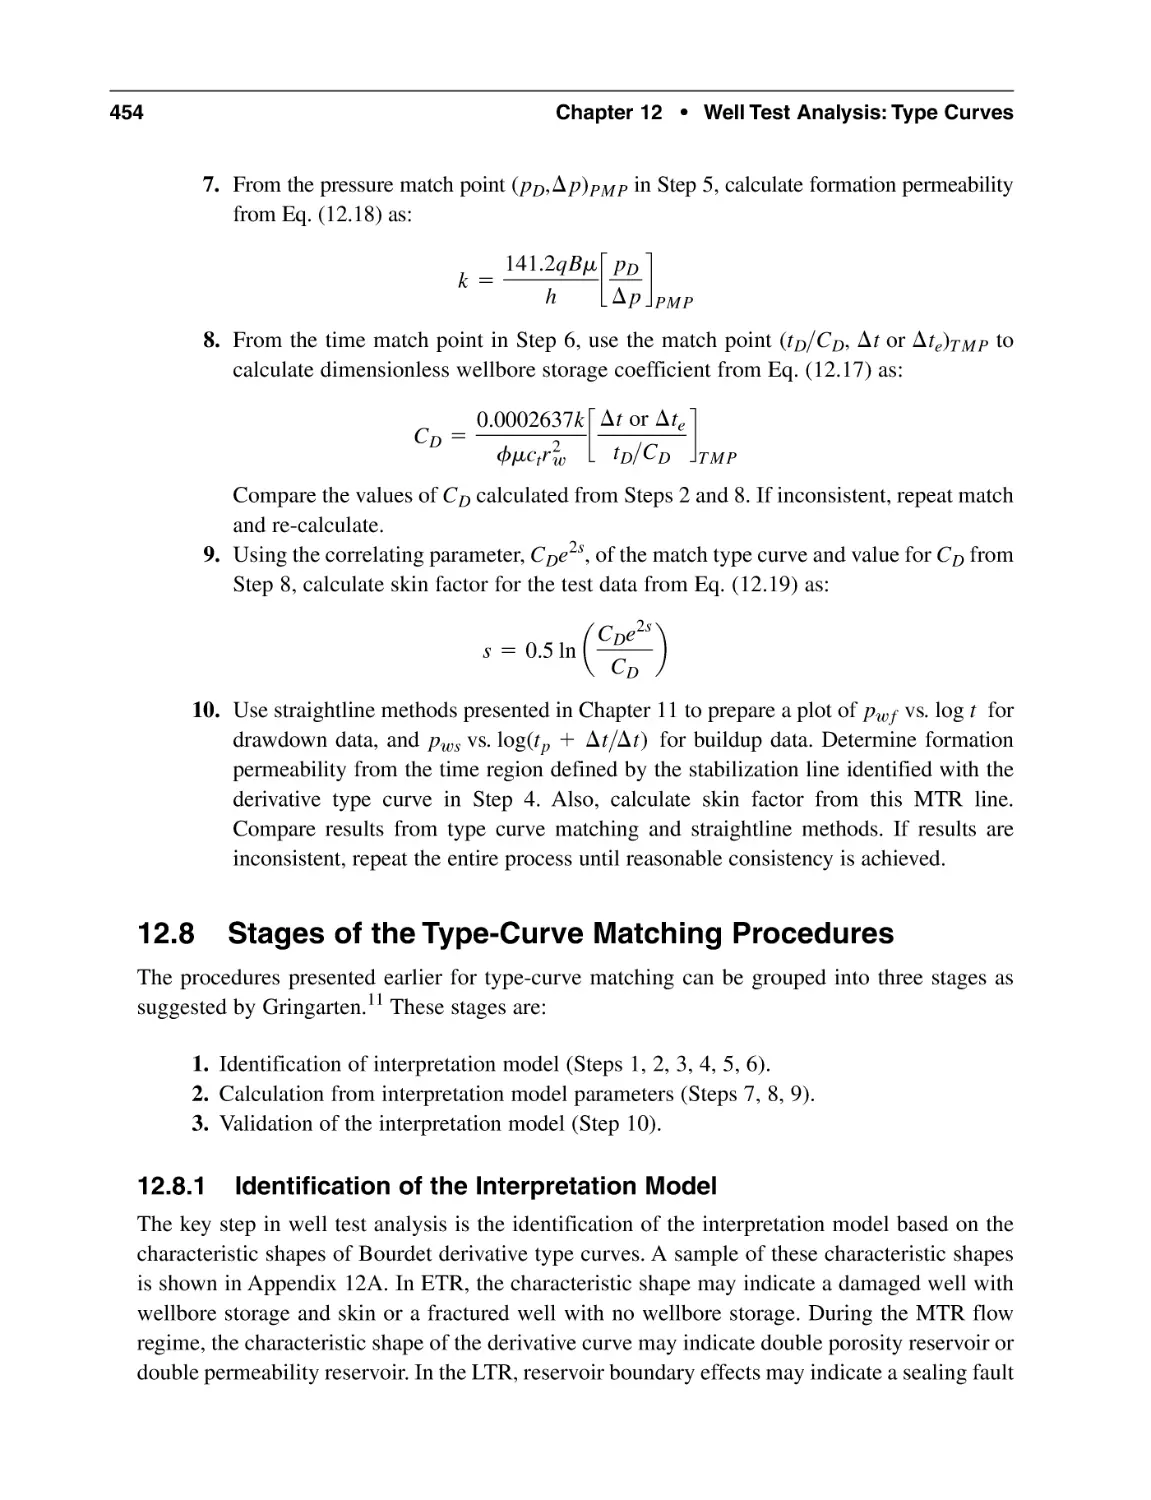 12.8 Stages of the Type-Curve Matching Procedures
12.8.1 Identification of the Interpretation Model